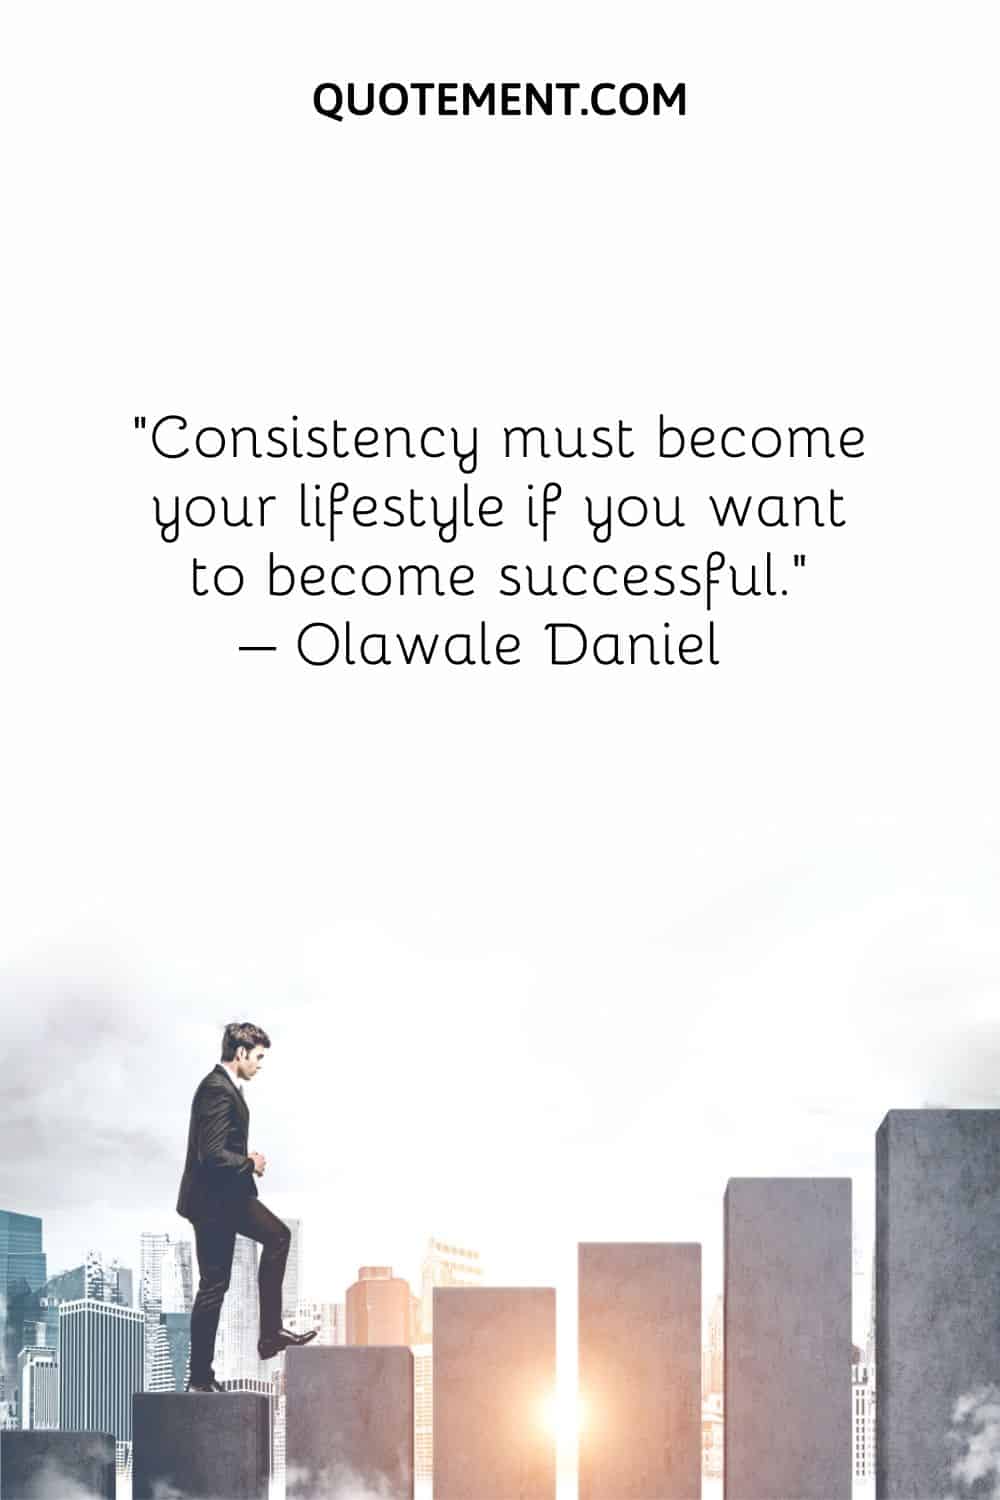 Consistency must become your lifestyle if you want to become successful.